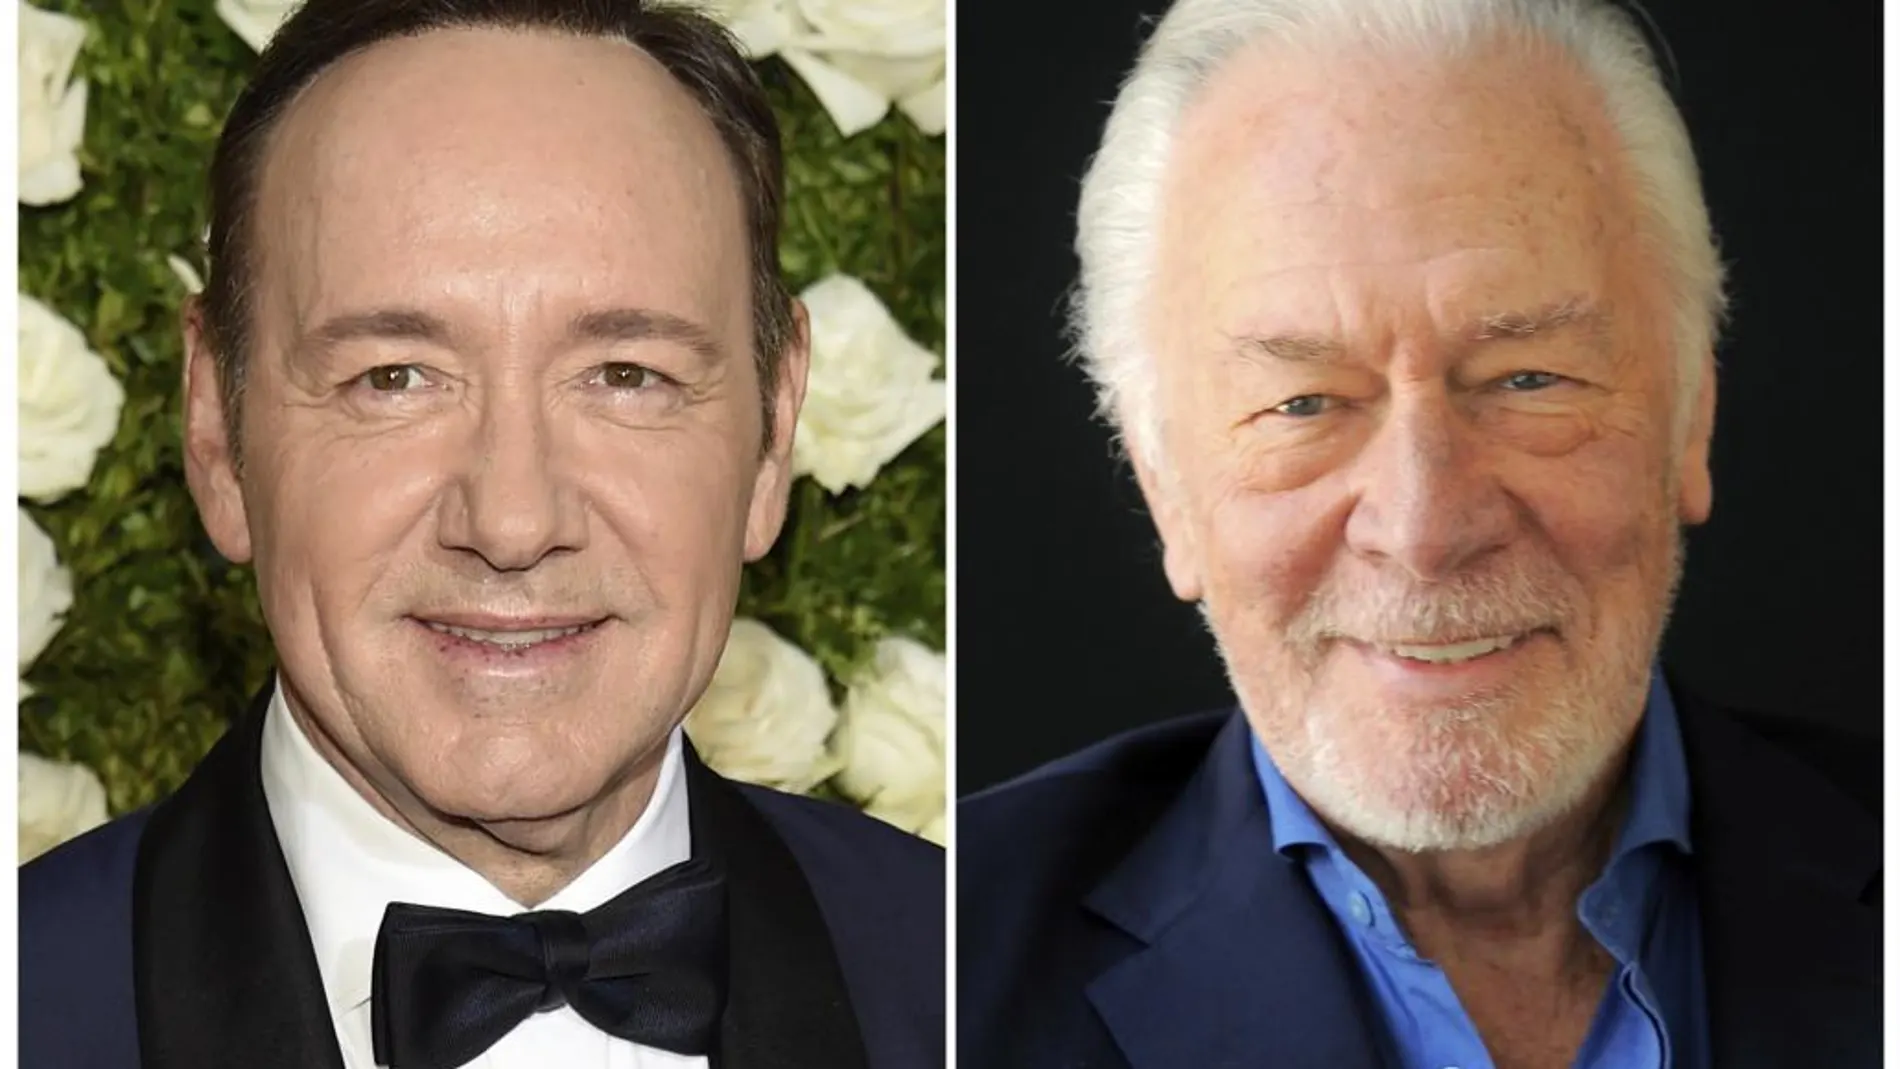 Kevin Spacey y Christopher Plummer